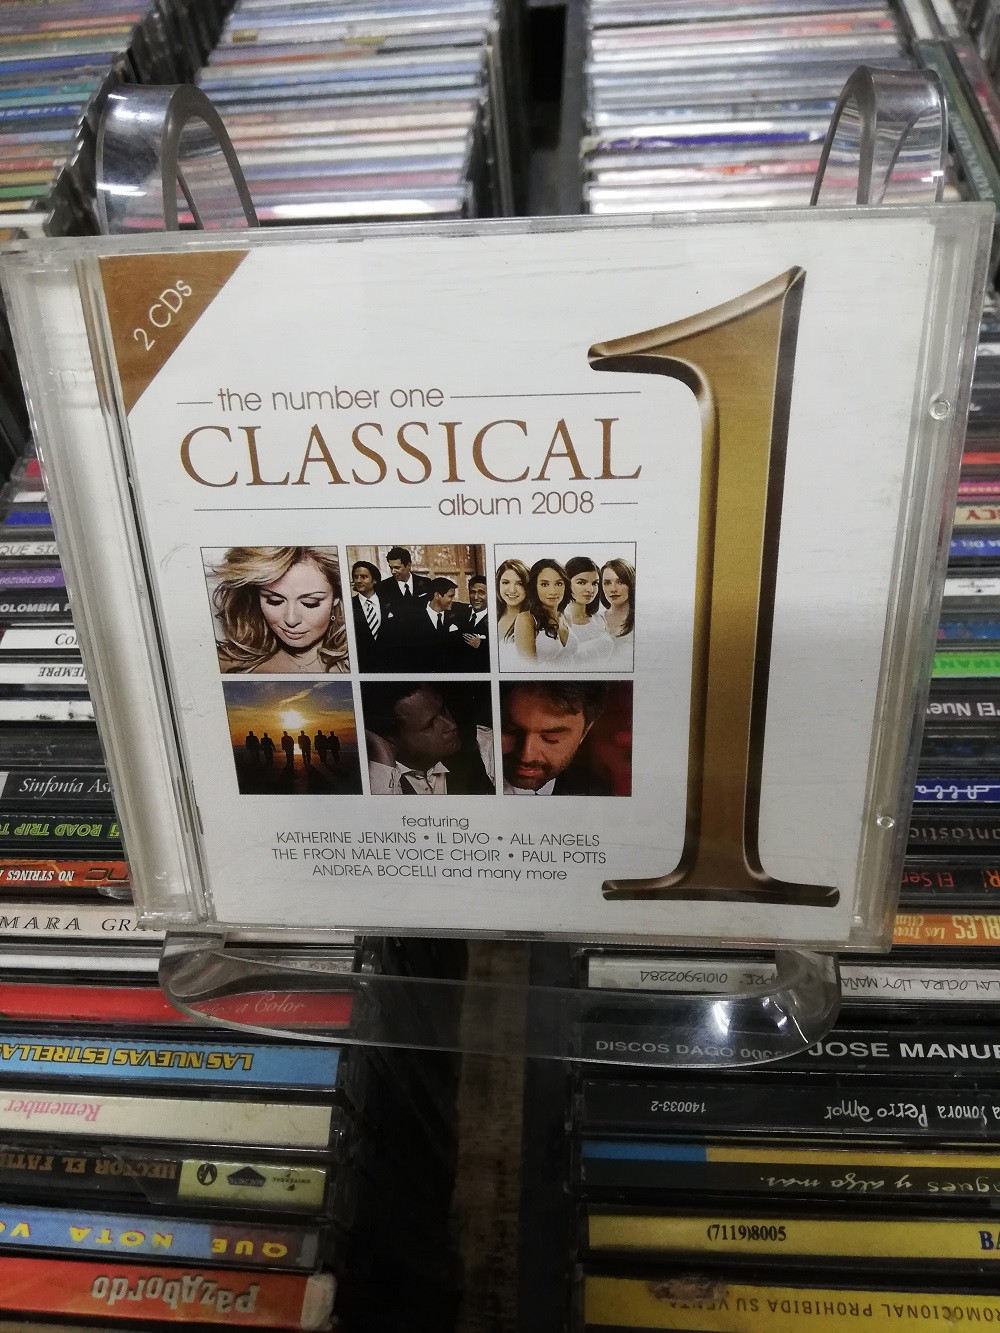 Imagen CD DOBLE THE NUMBER ONE CLASSICAL ALBUM 2008.